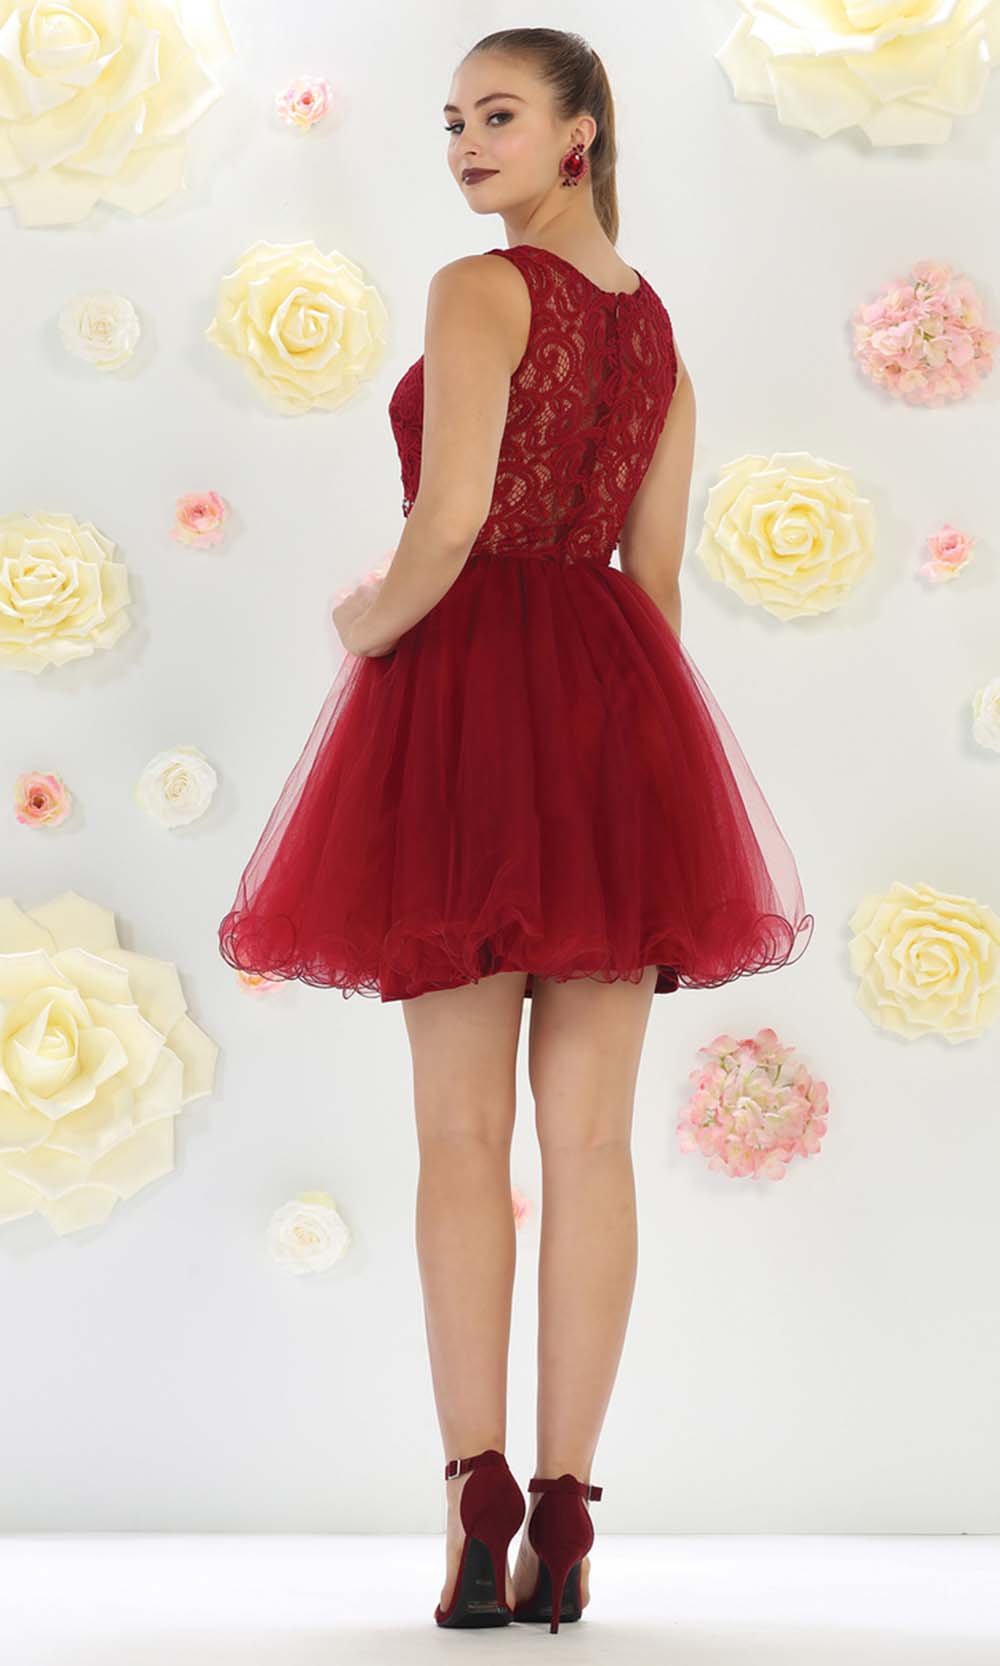 May Queen - MQ1268 Jewel Embroided Cocktail Dress In Red and Blackgrade 8 grad dresses, graduation dresses